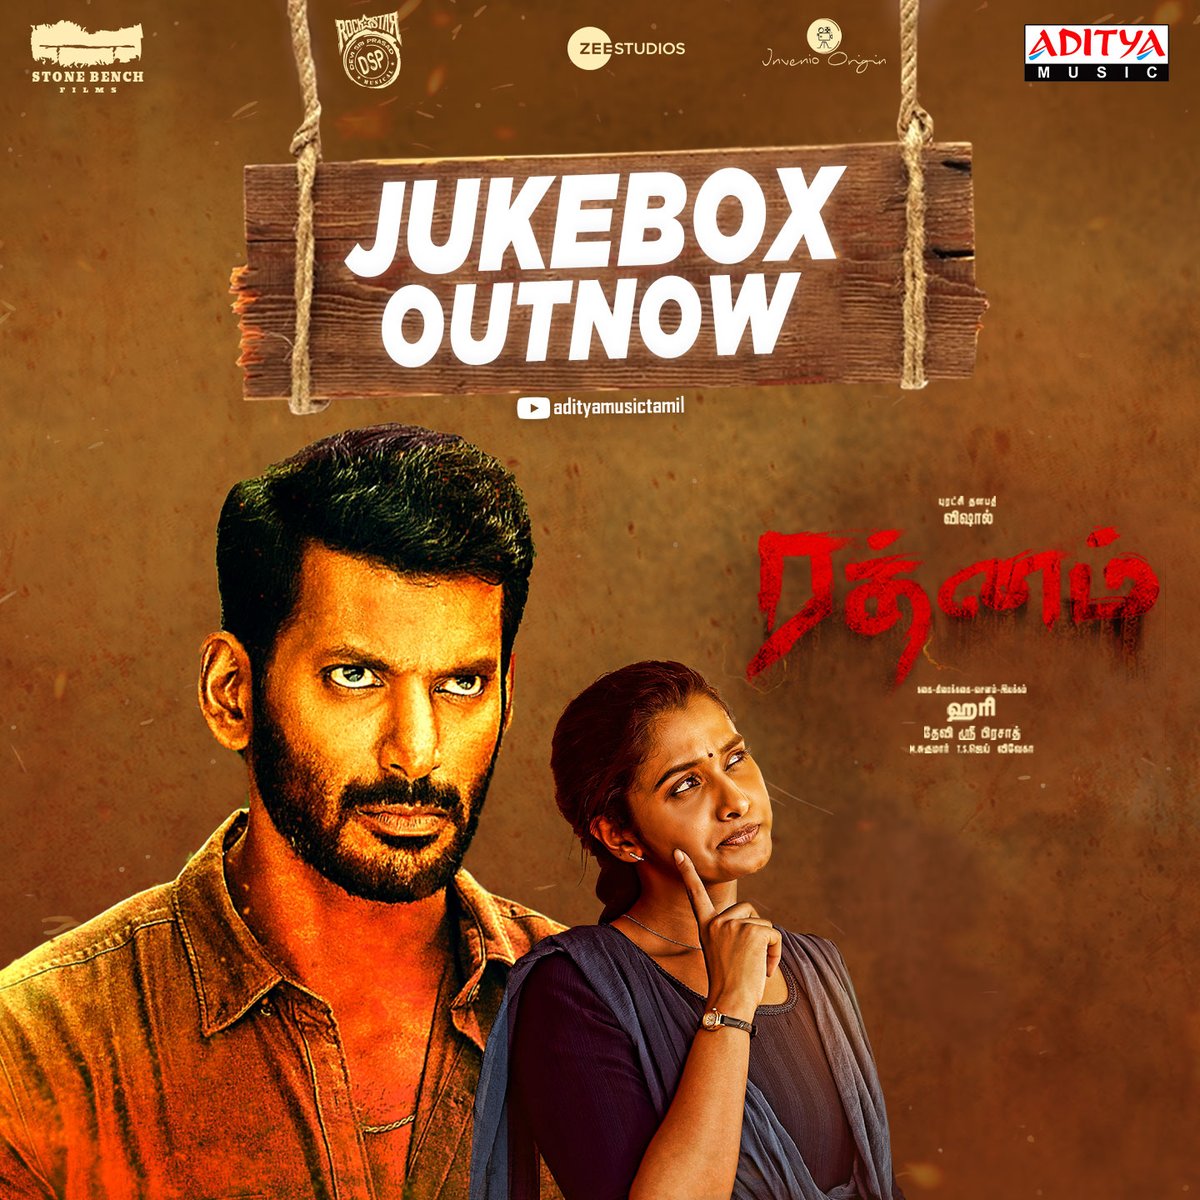 Get ready for an electrifying and heart-melting experience with the #Rathnam Audio Jukebox, out now! Telugu - youtu.be/QAPWe06_zdo Tamil - youtu.be/_pIucPba-P8 IN CINEMAS NOW🎬 Starring Puratchi Thalapathy @VishalKOfficial. A film by #Hari A @ThisisDSP musical.